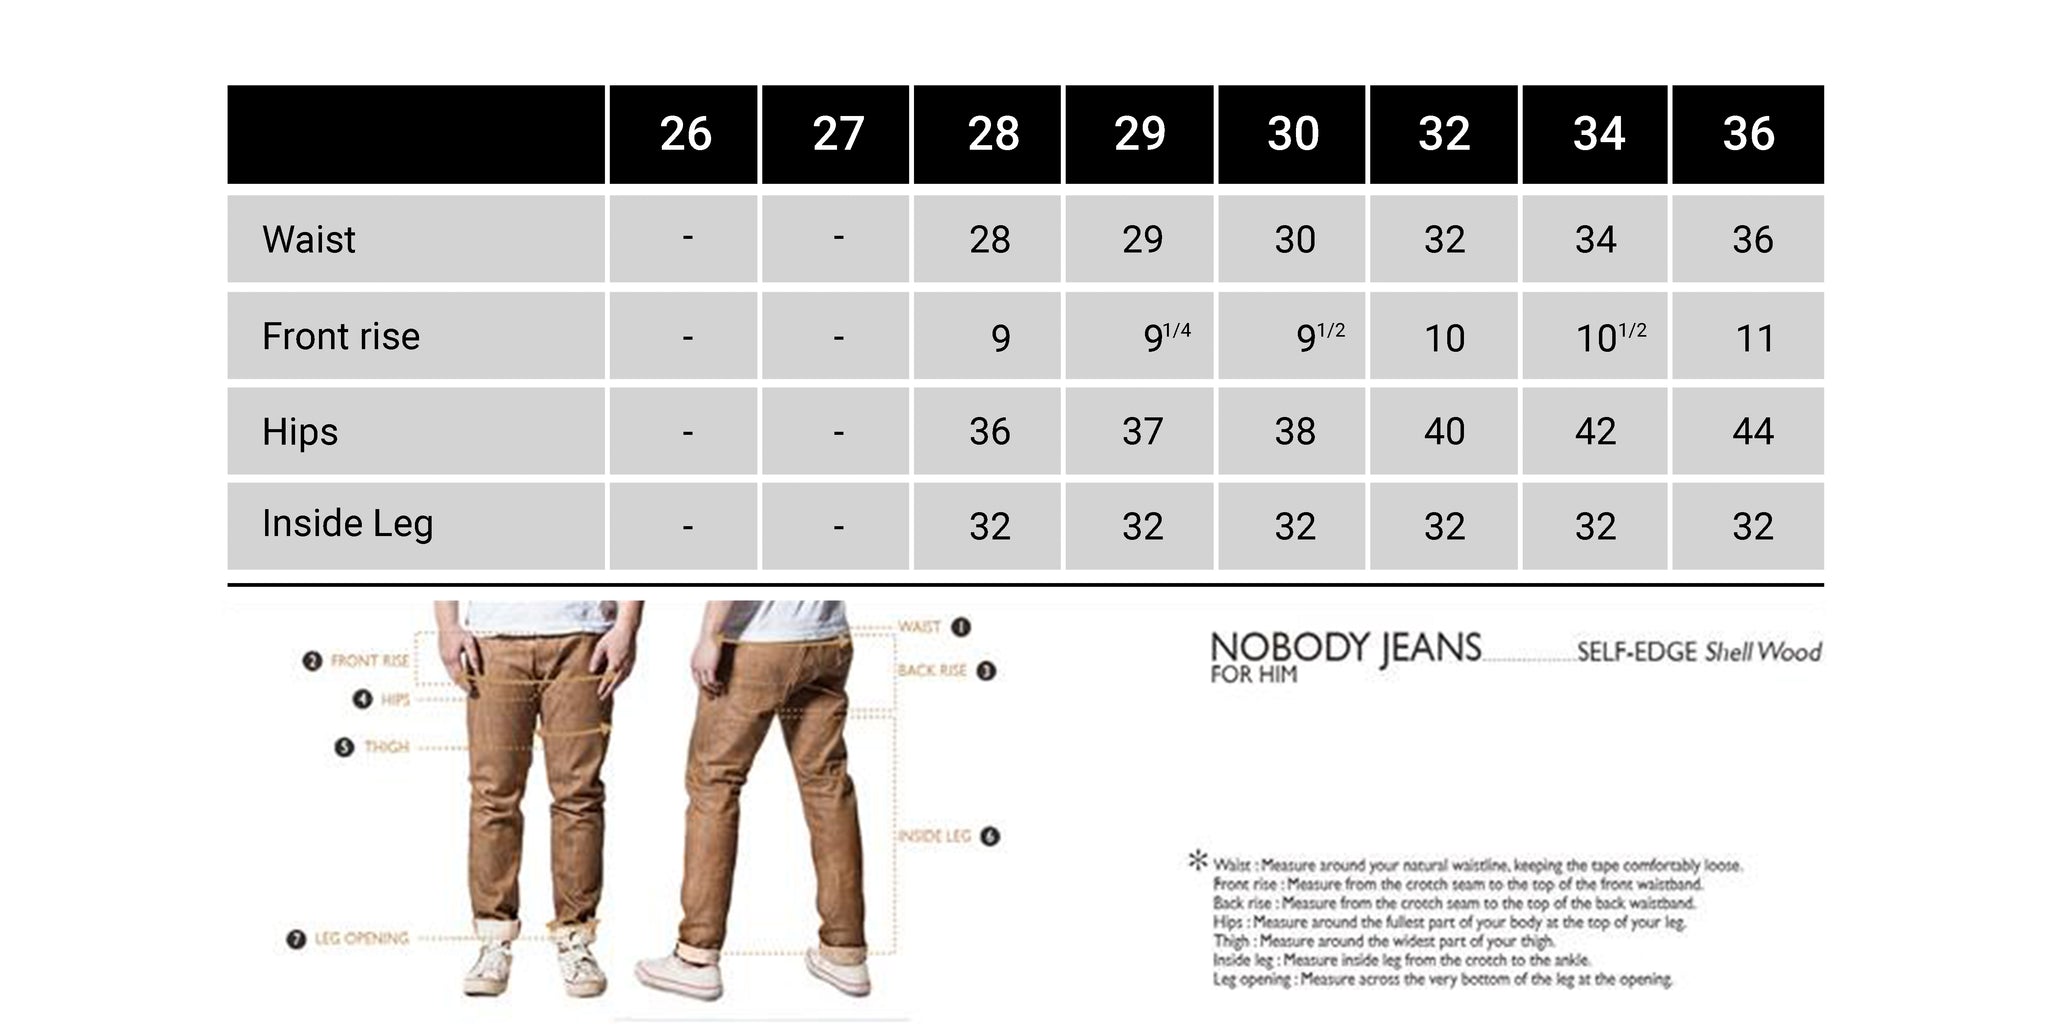 Jeans Size Comparison Chart By Brand